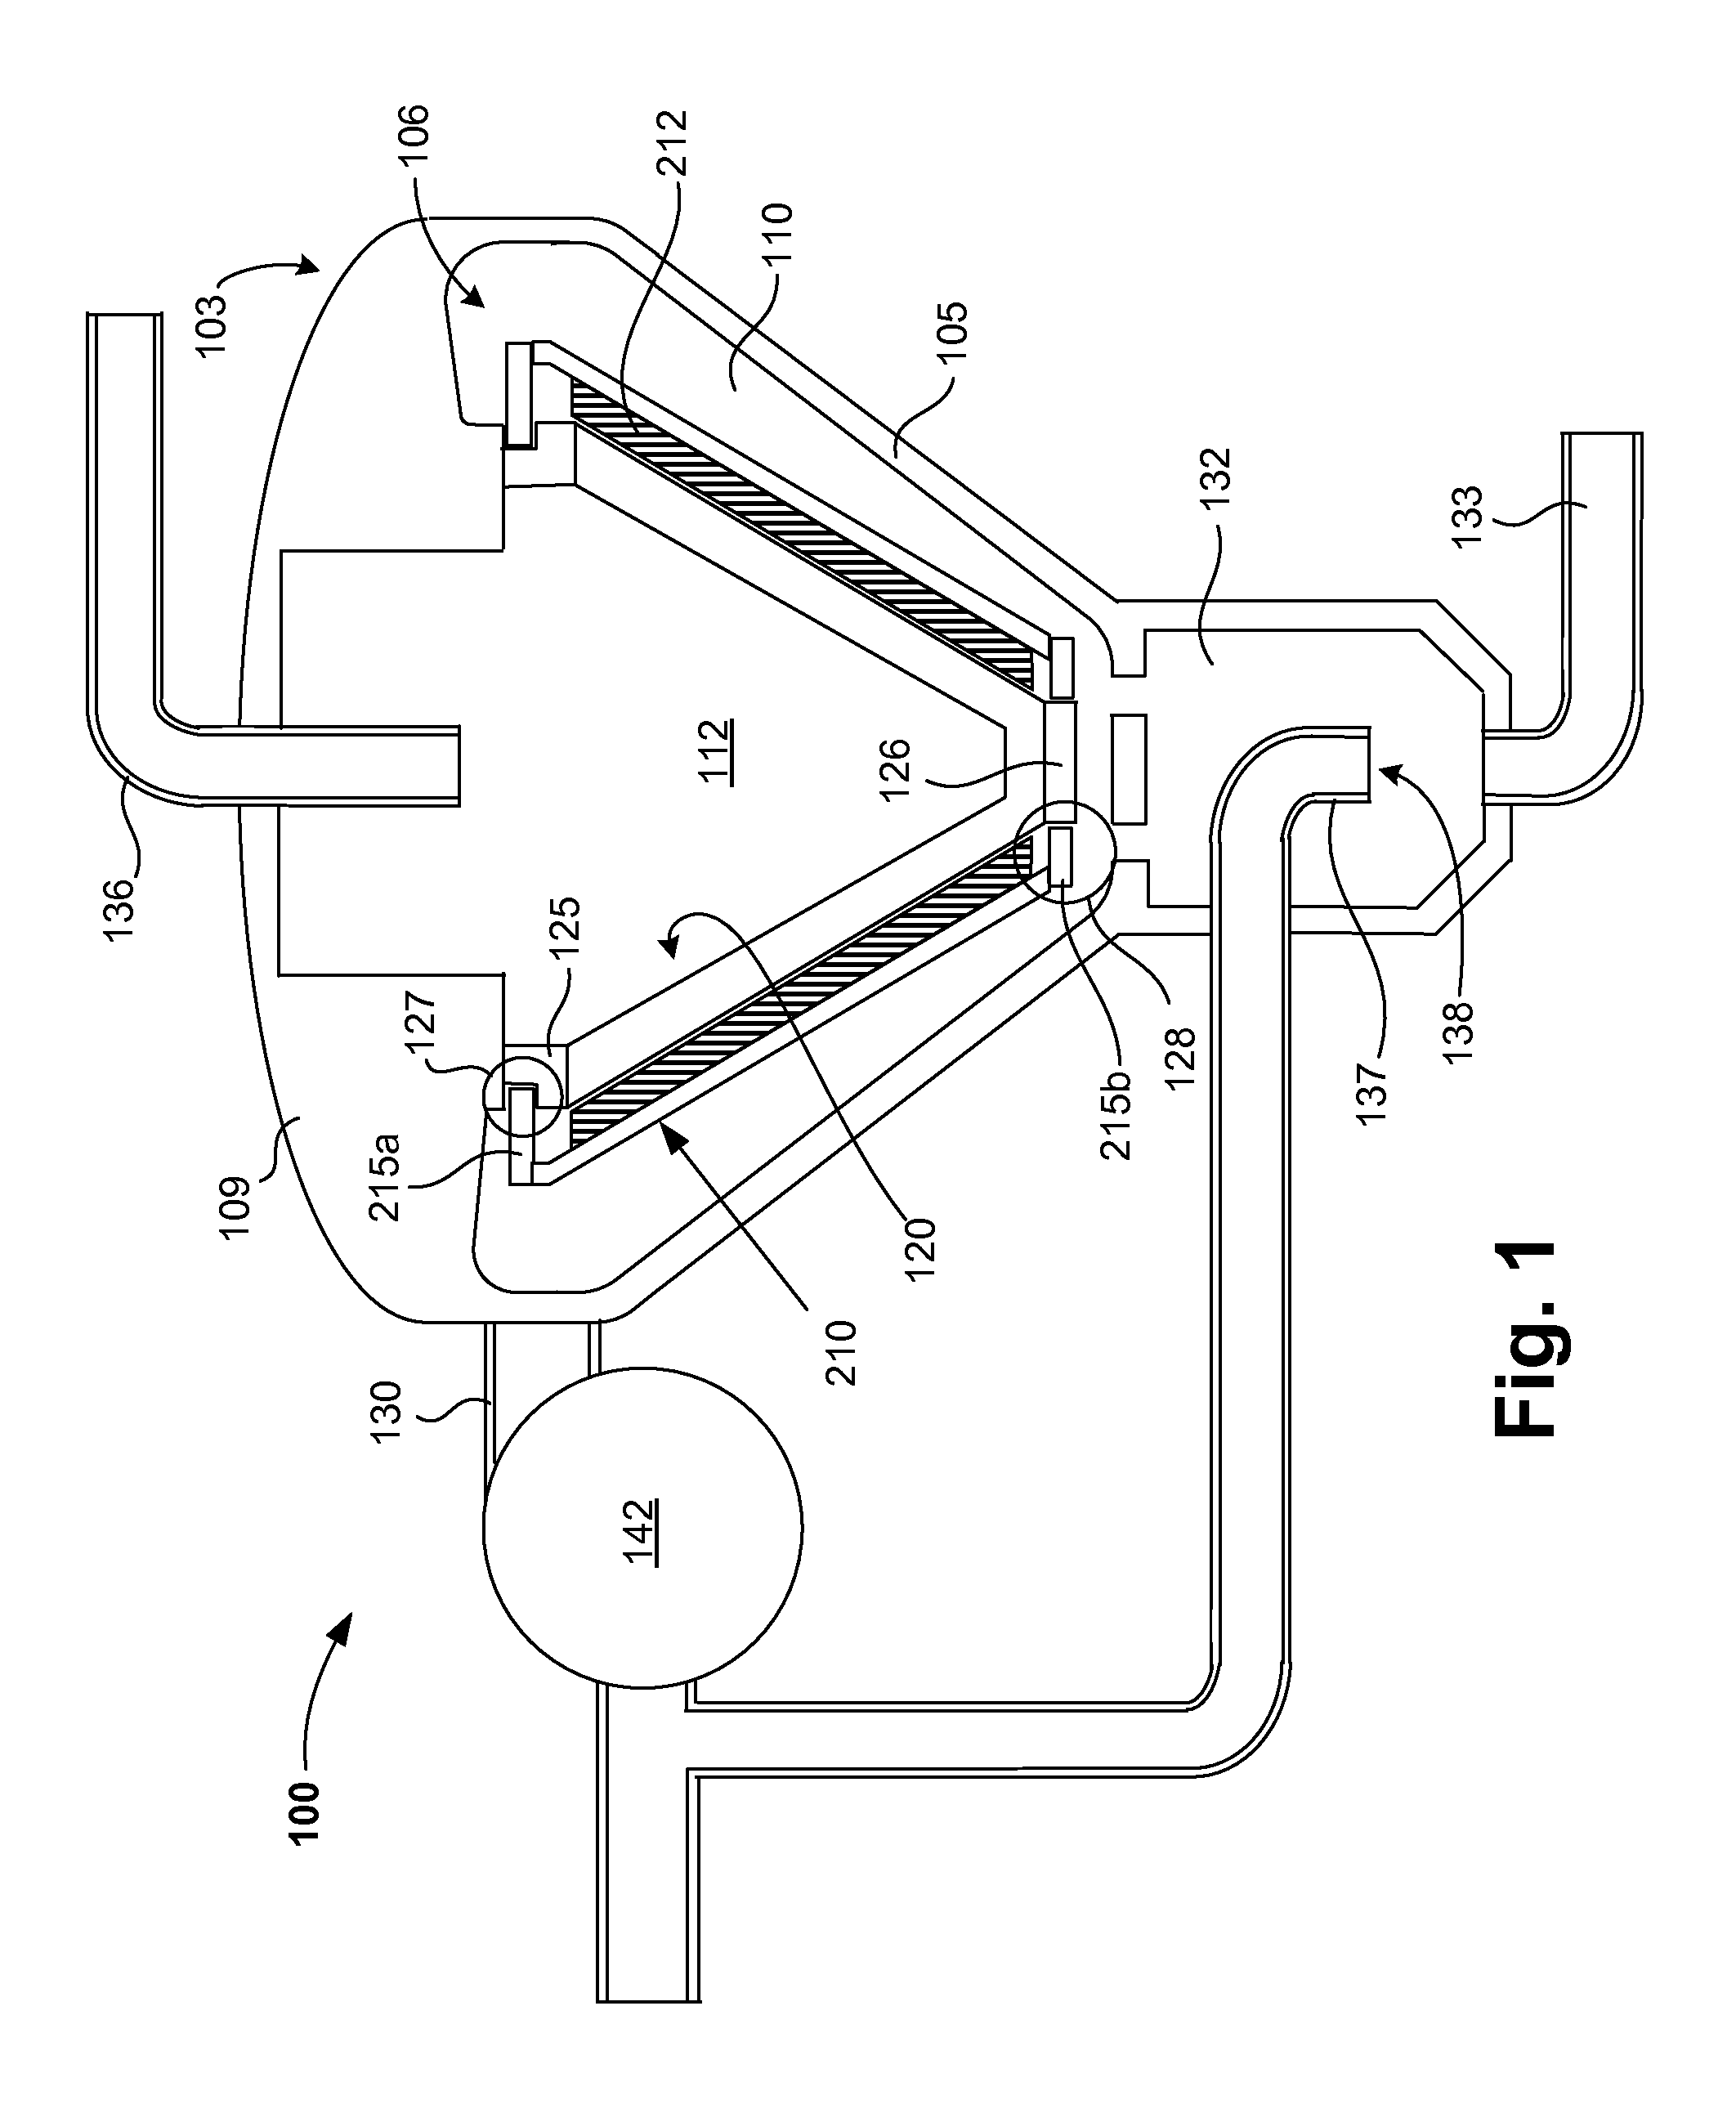 Cleaning assembly for use in fluid filtration systems